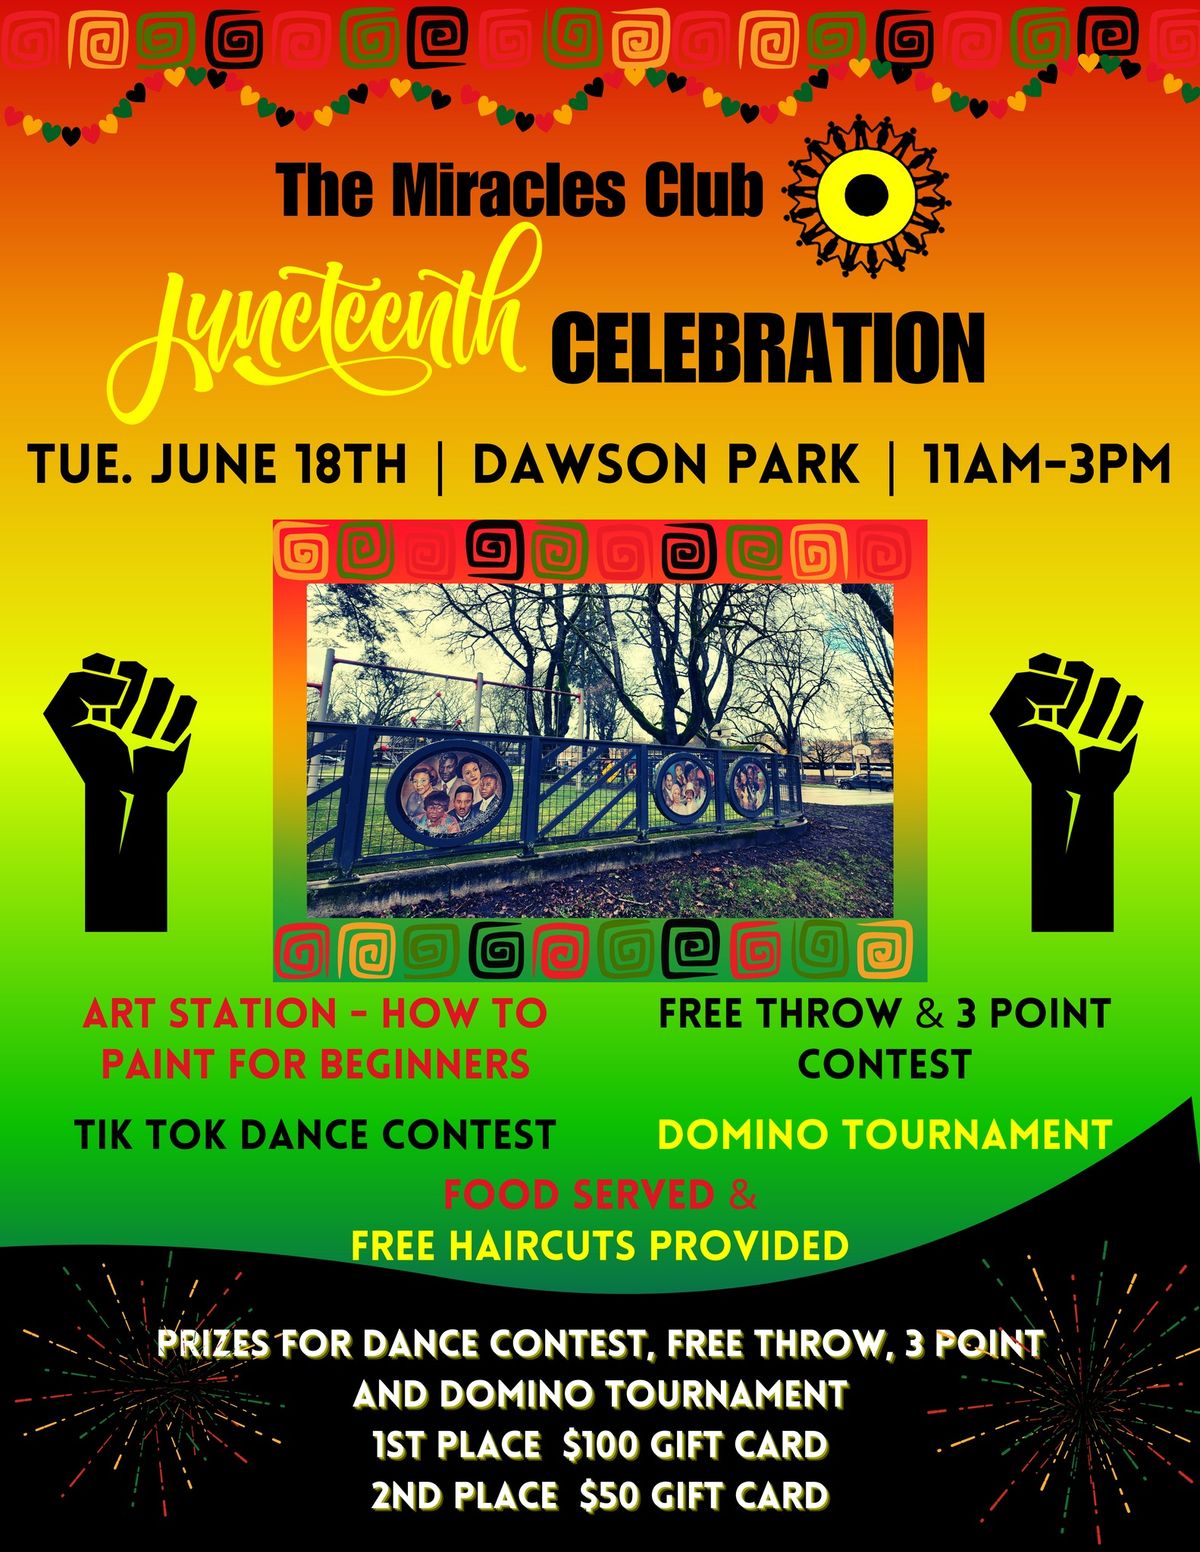 Juneteenth Celebration at Dawson Park hosted by The Miracles Club Outreach Team